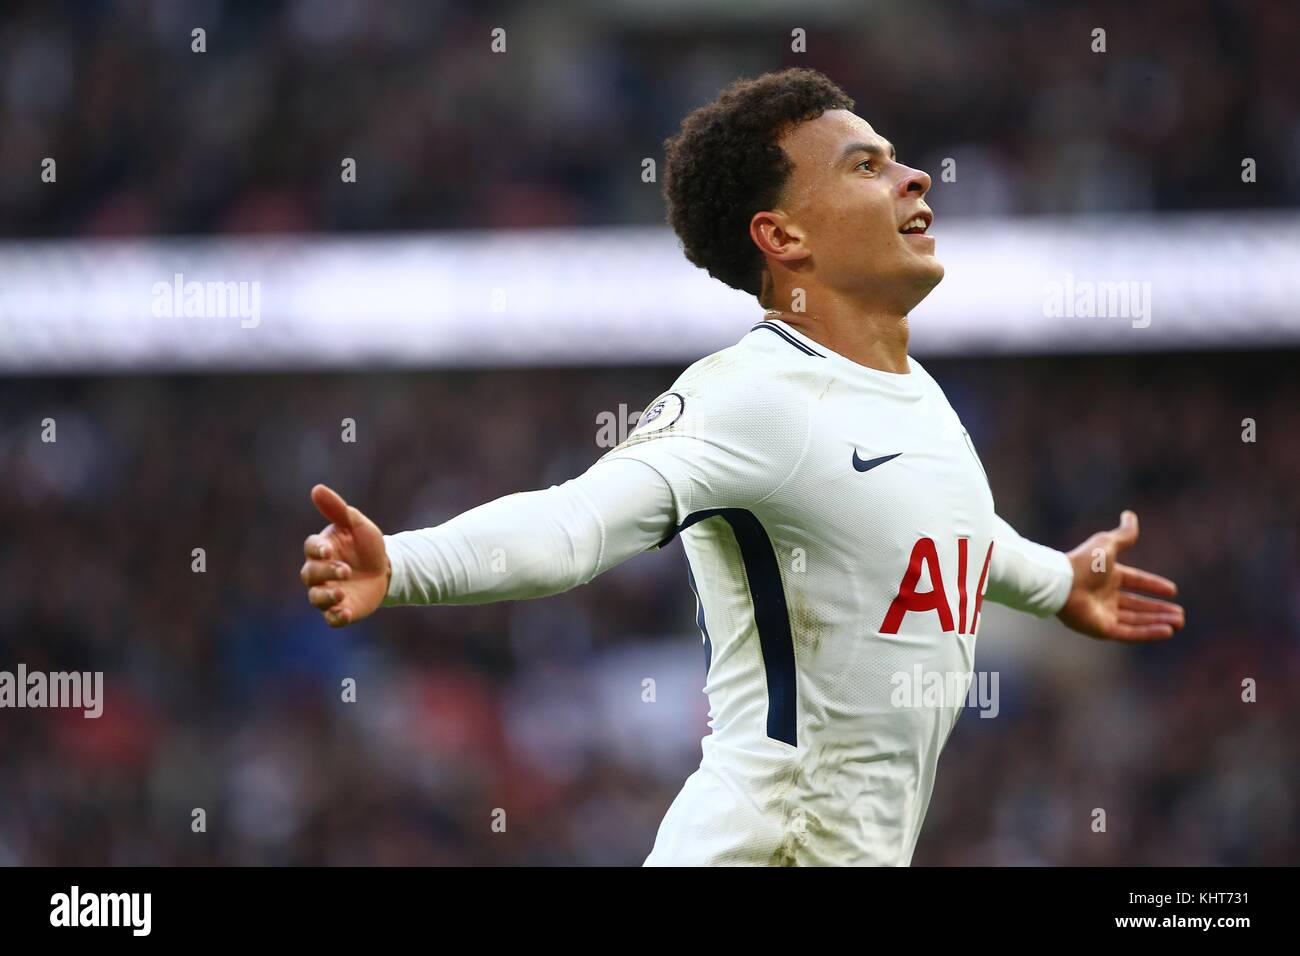 Dele Alli of Tottenham celebrates scoring during the Premier League match  between Tottenham Hotspur and Liverpool at Wembley Stadium in London. 22  Oct 2017 *** EDITORIAL USE ONLY *** No merchandising. For